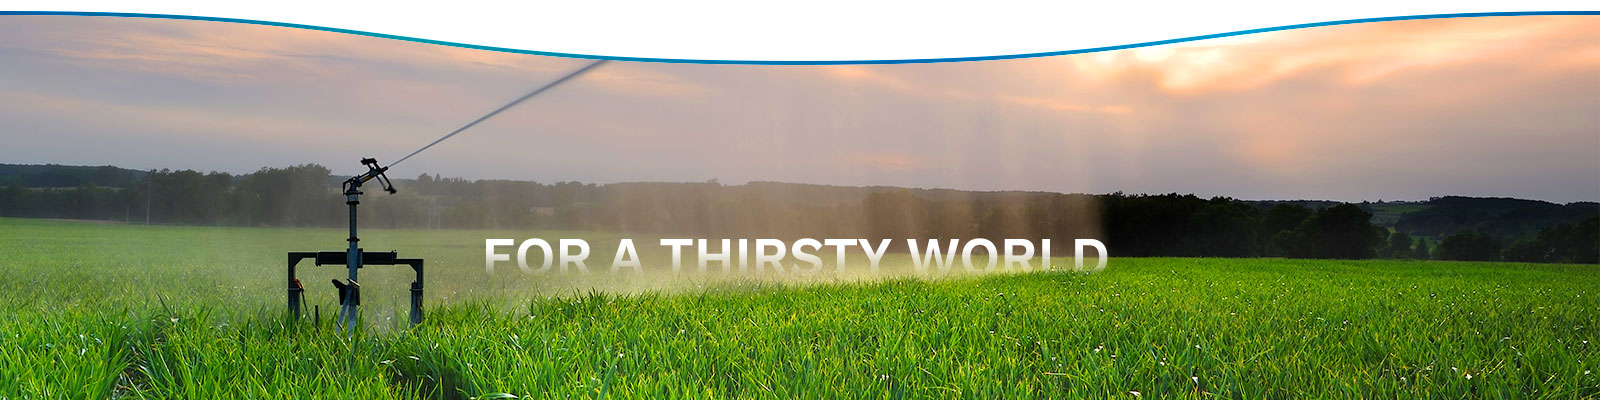 thirsty-world-drilling-water